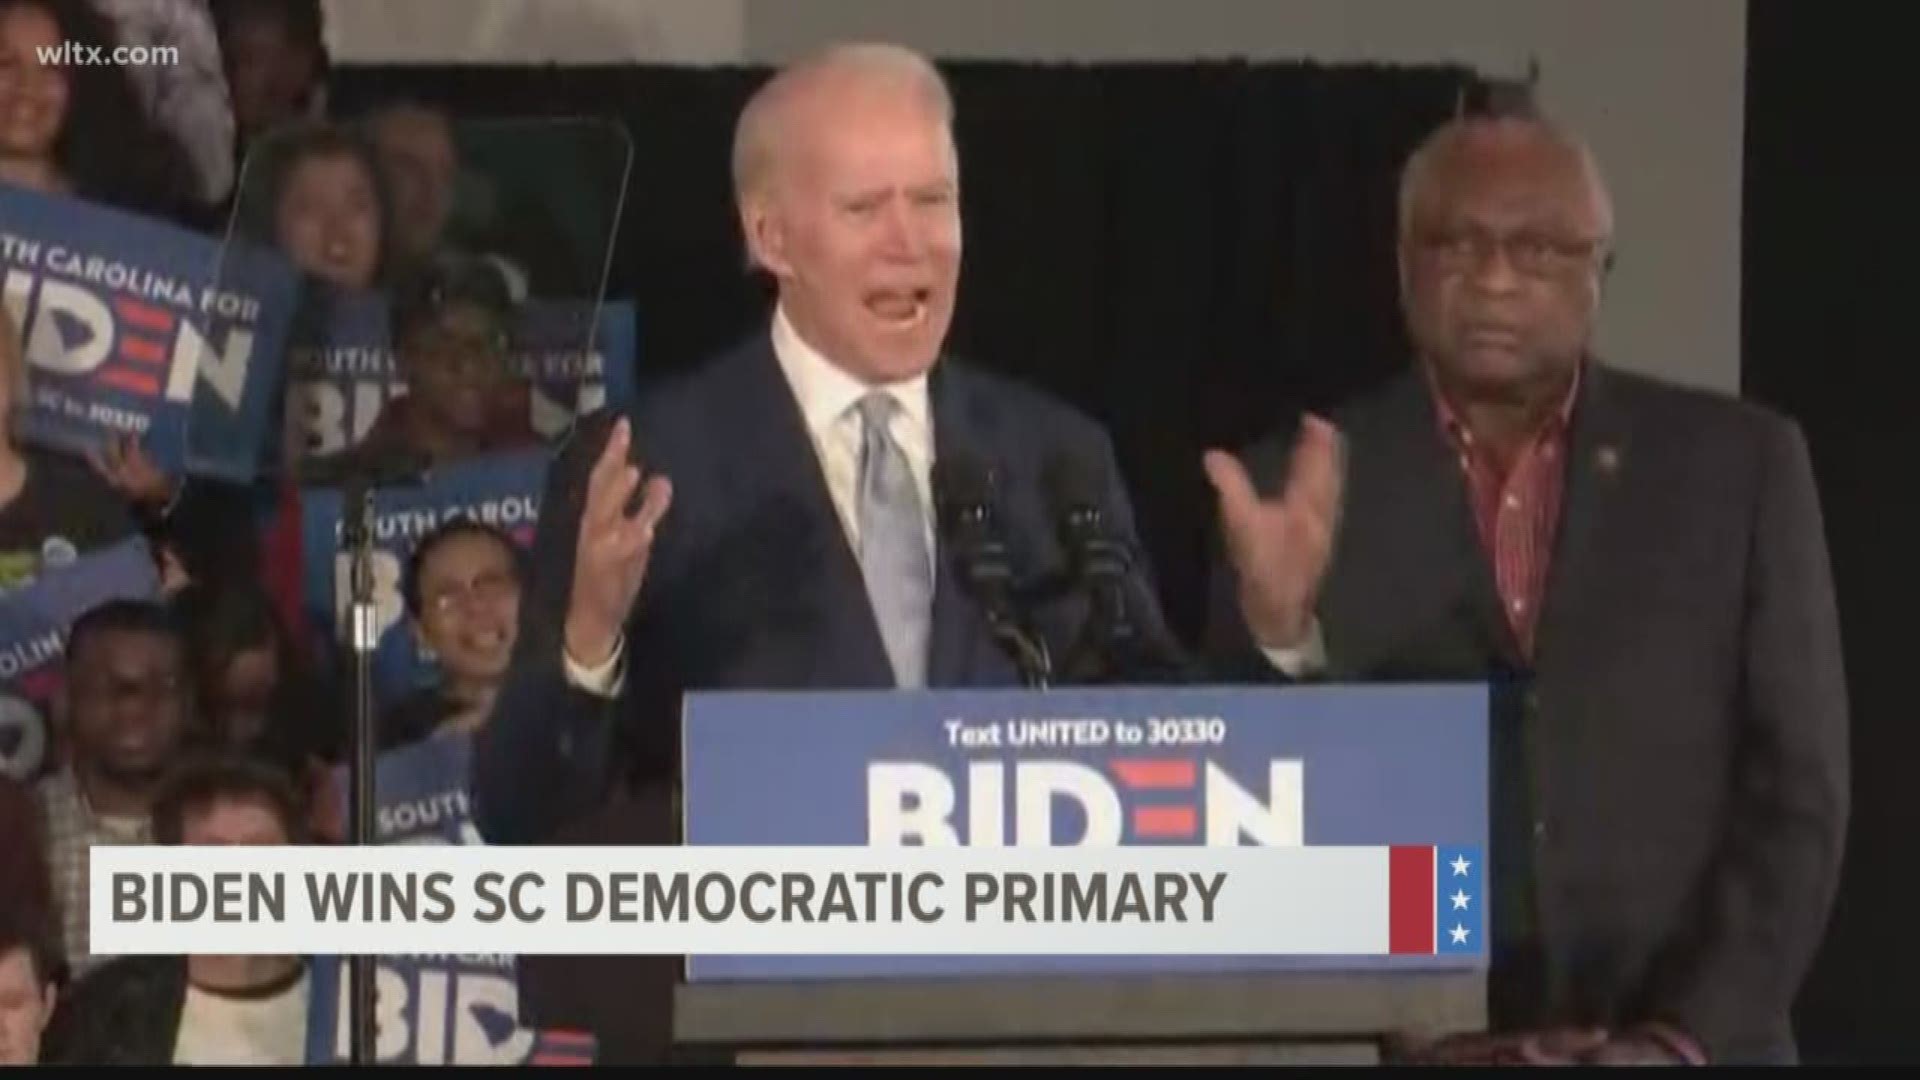 Joe Biden has scored a resounding victory in South Carolina’s Democratic primary, and Tom Steyer has ended his presidential bid.